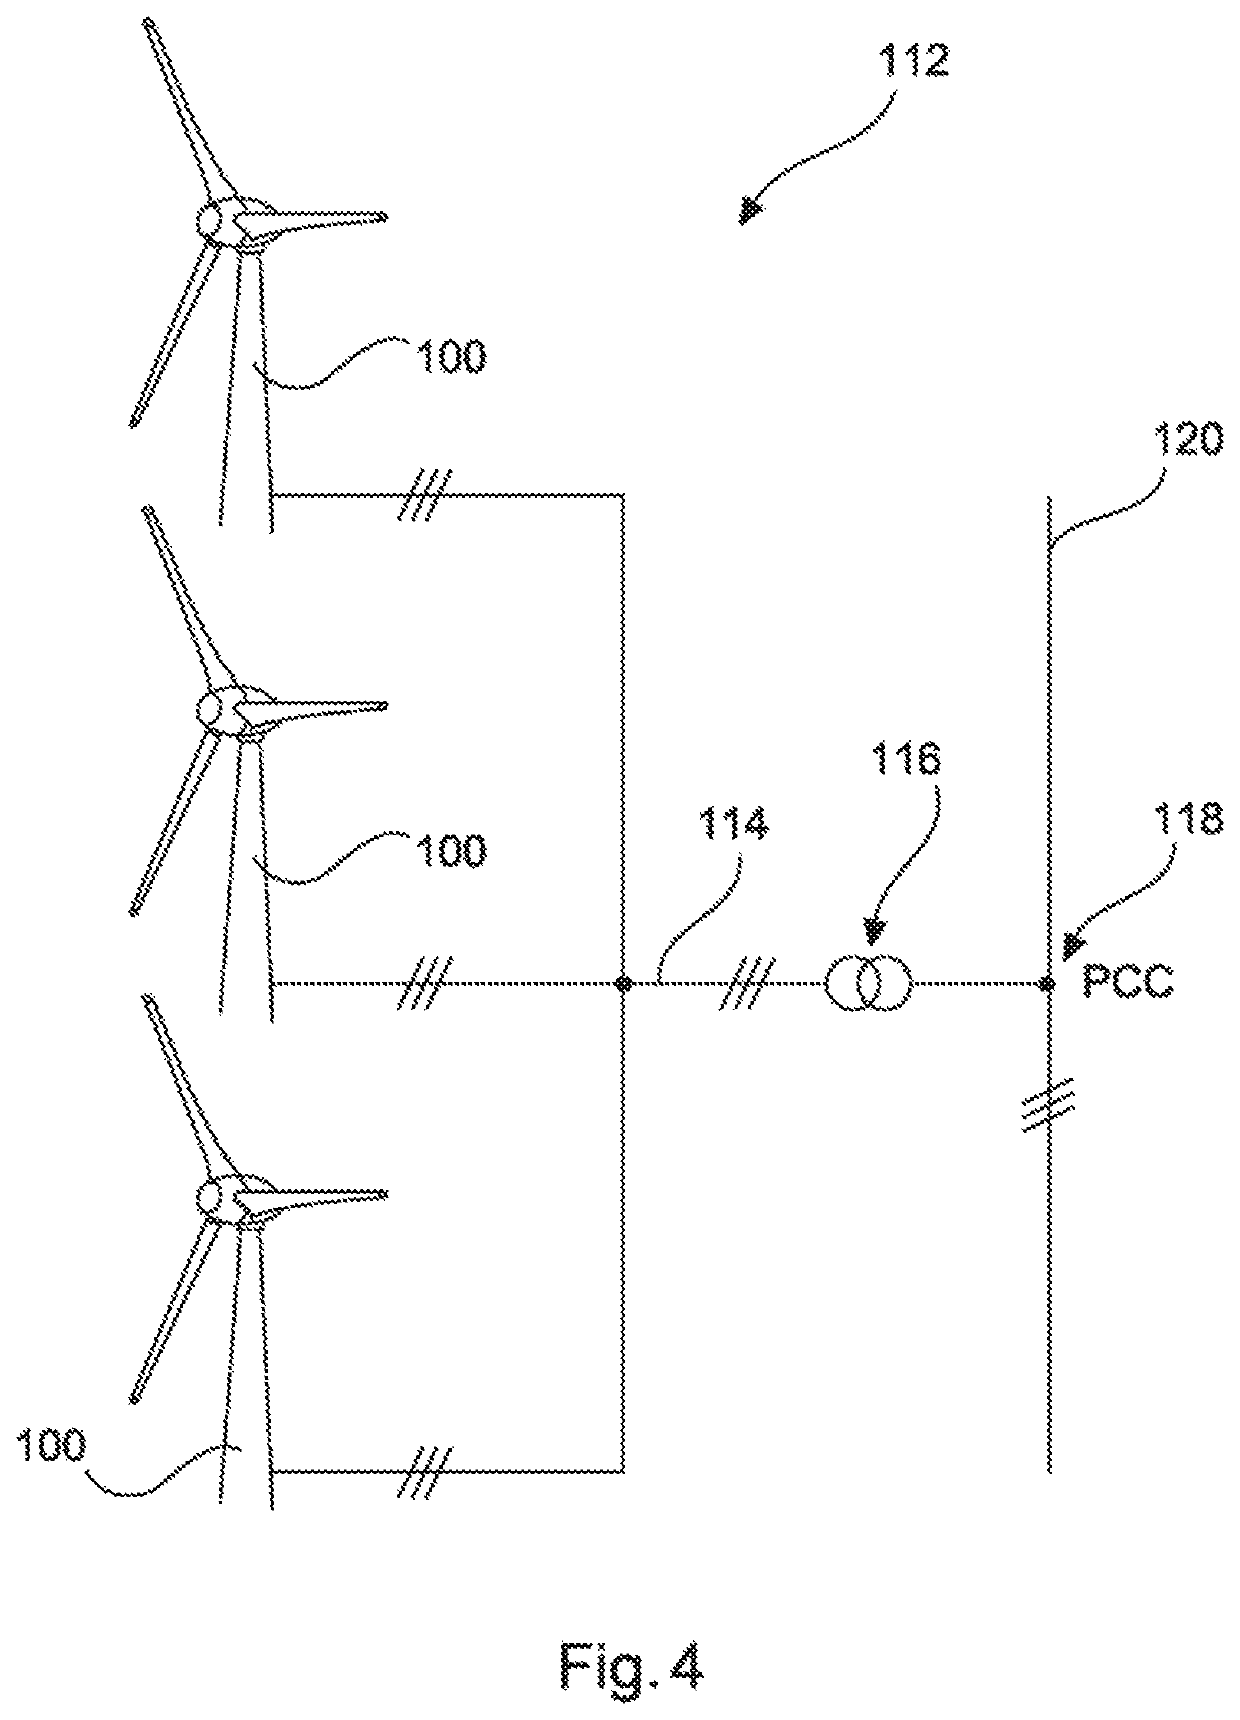 Method for determining an equivalent wind velocity